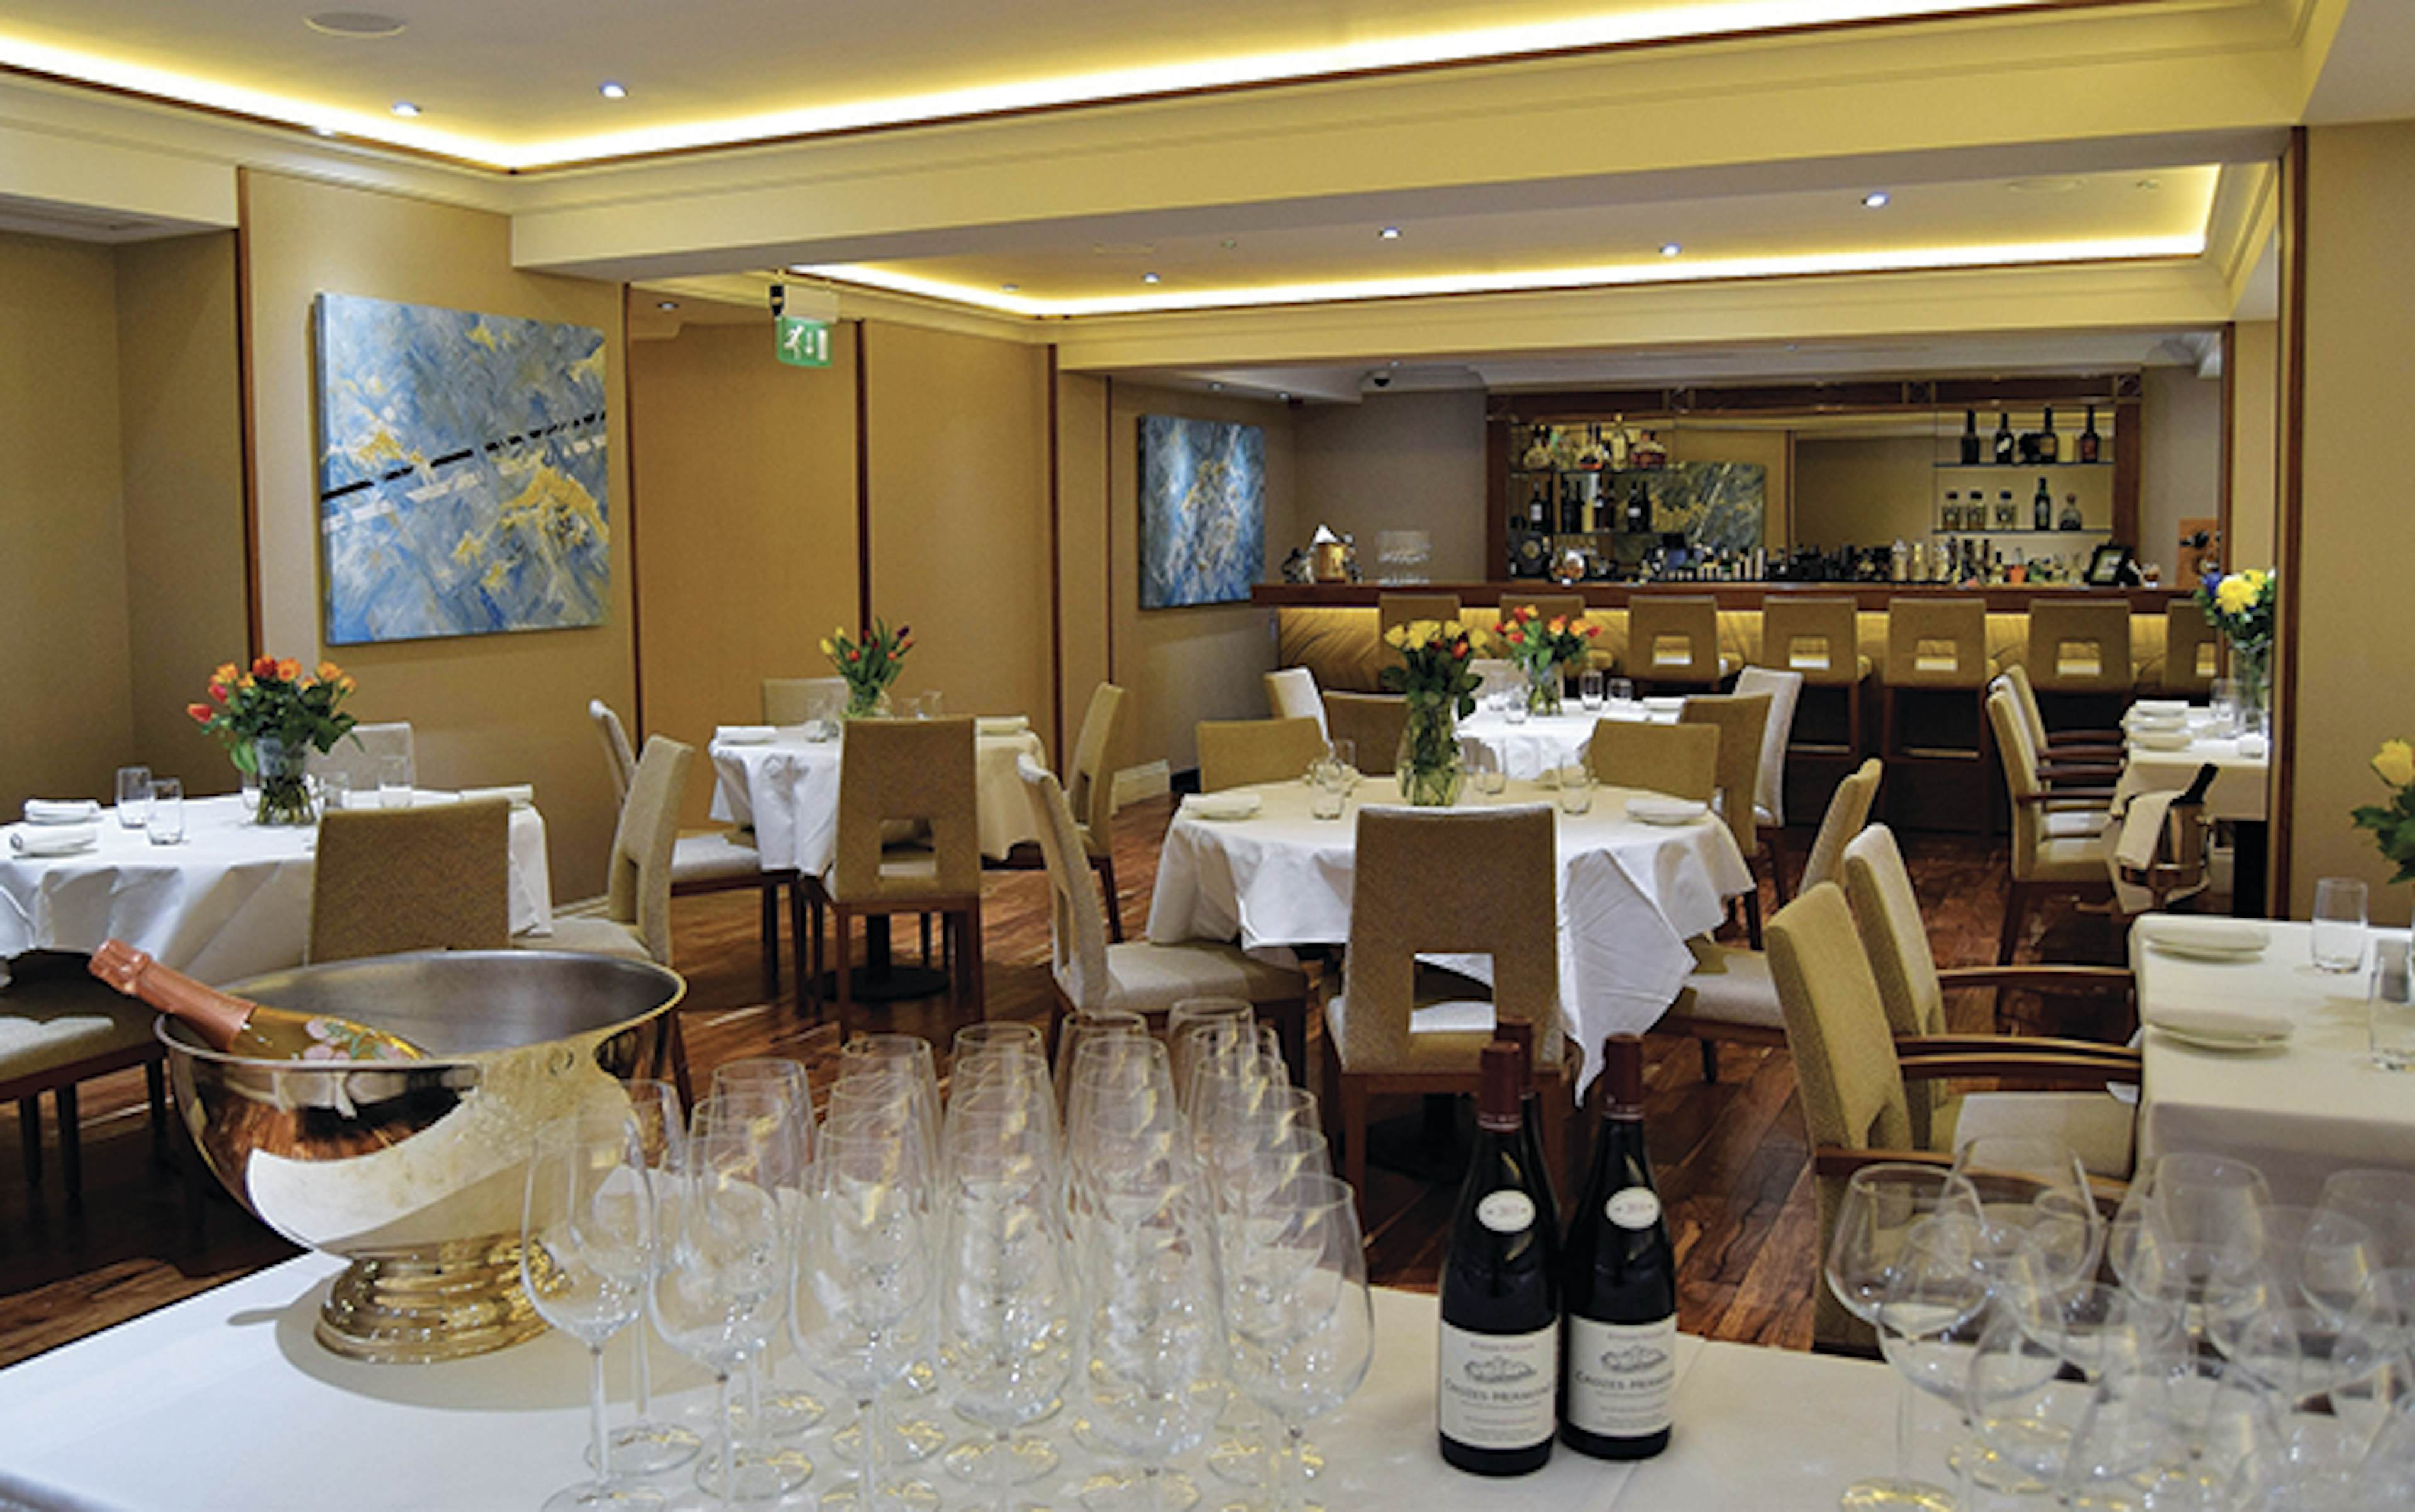 Alexandrie Restaurant - Coloured Canyon Dining Room and Bar image 1